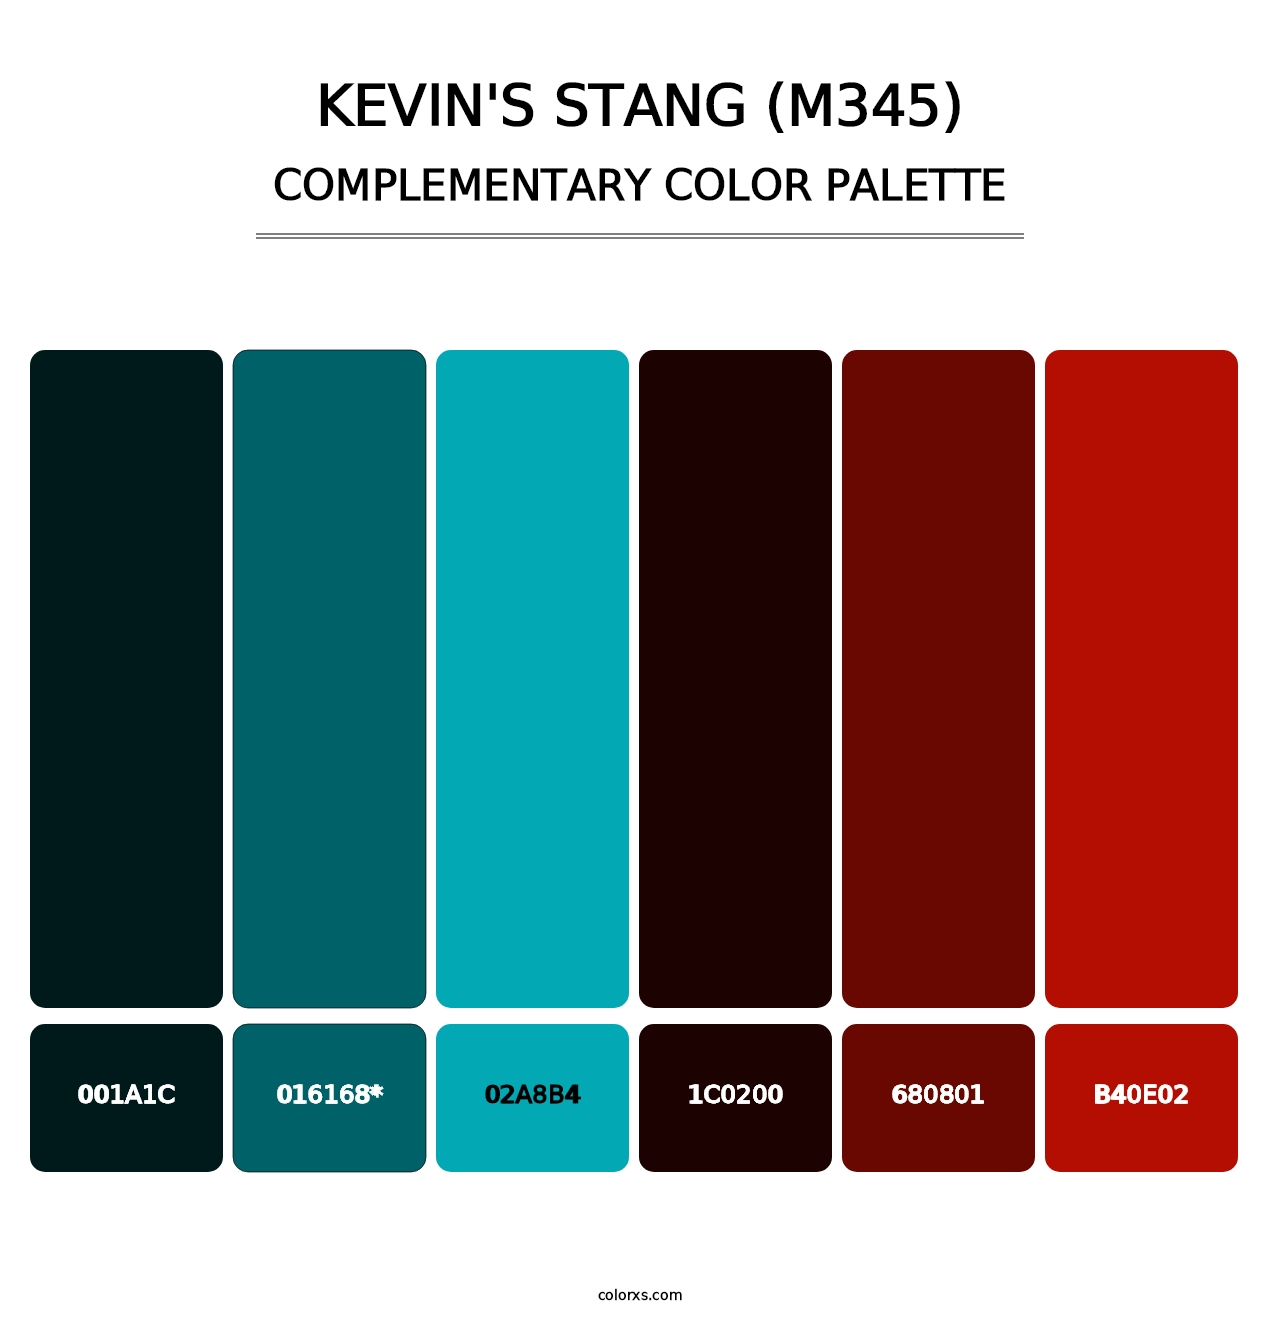 Kevin's Stang (M345) - Complementary Color Palette